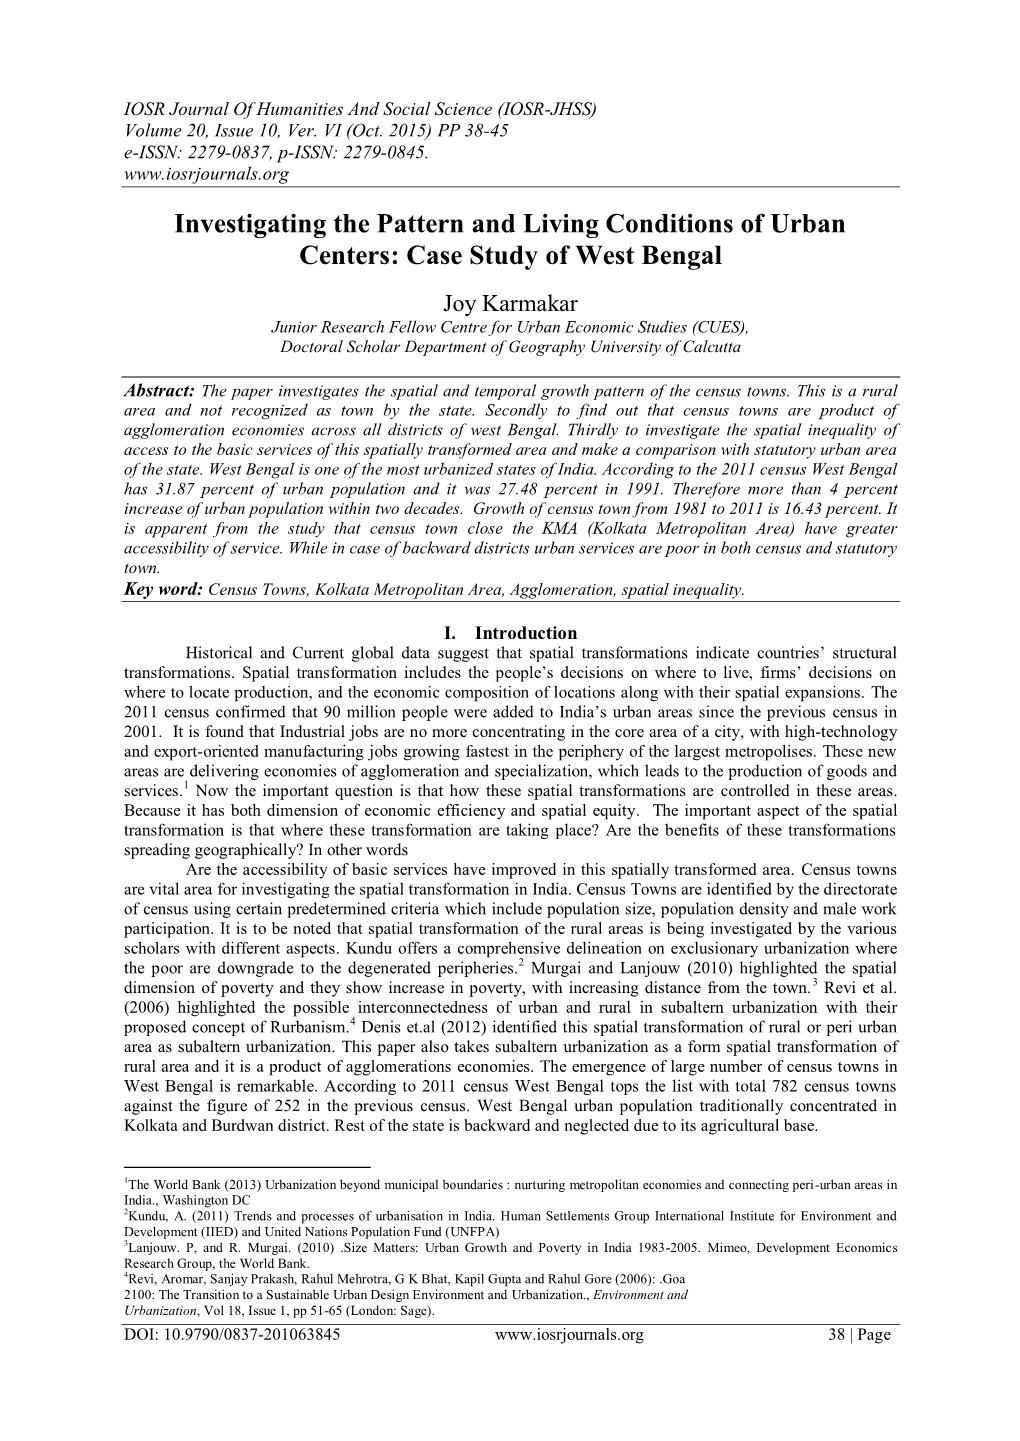 Investigating the Pattern and Living Conditions of Urban Centers: Case Study of West Bengal